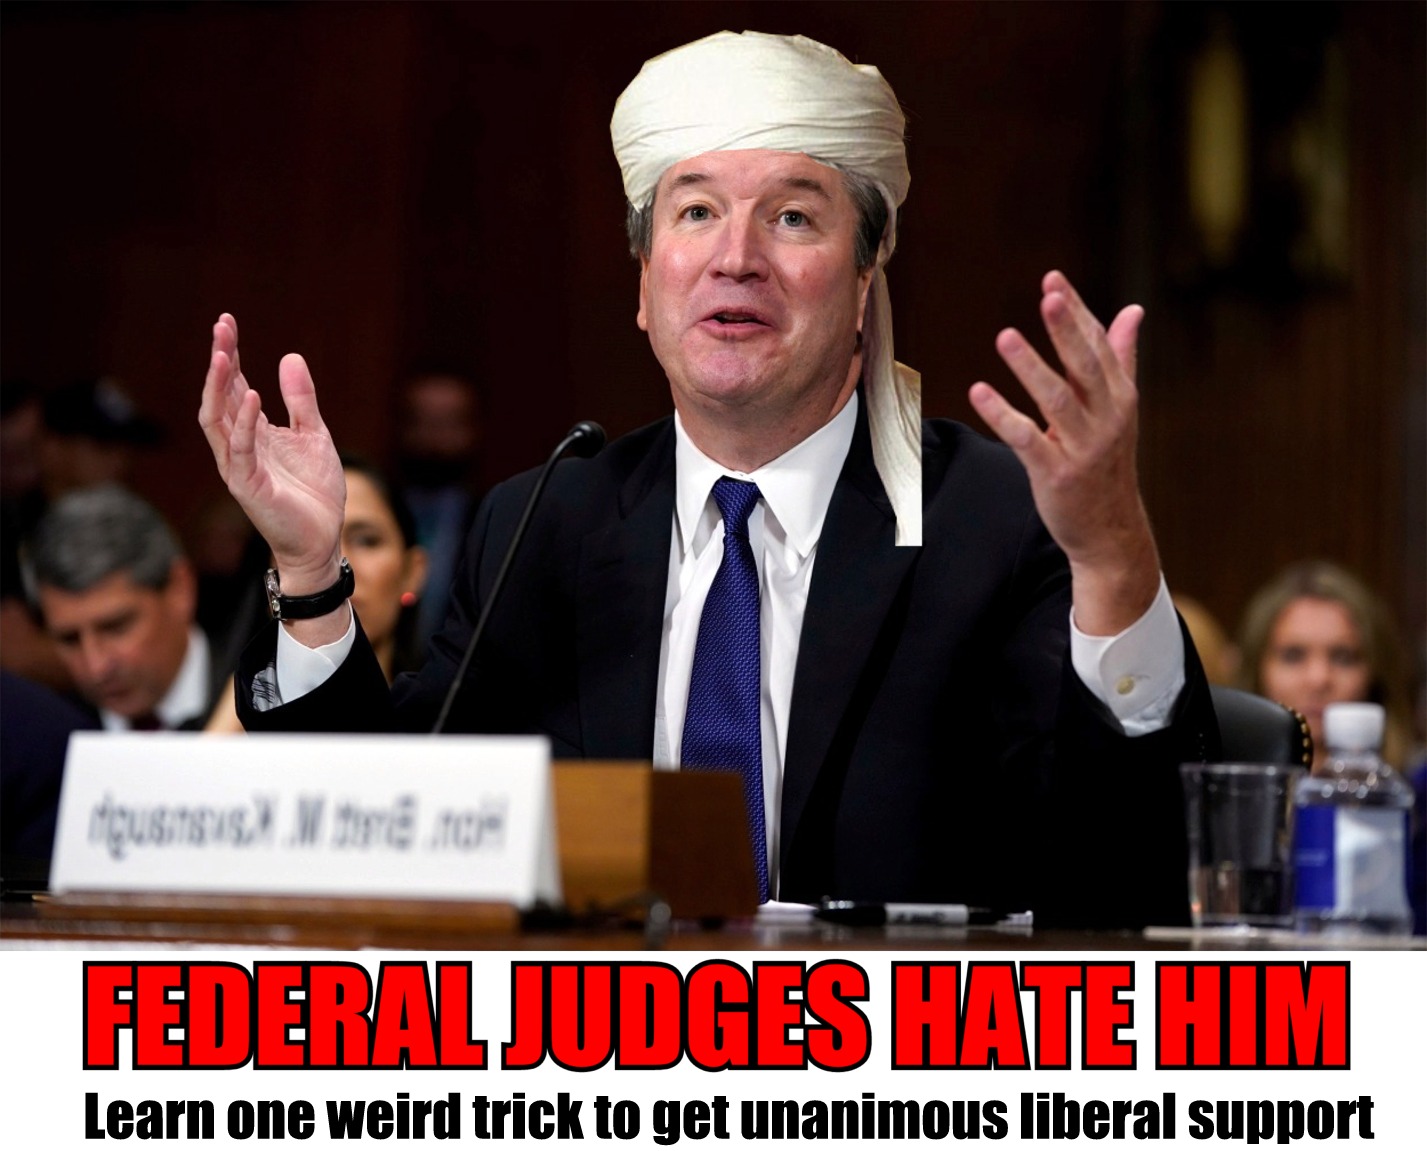 public speaking - ngustsusXM tere non Federal Judges Hate Him Learn one weird trick to get unanimous liberal support